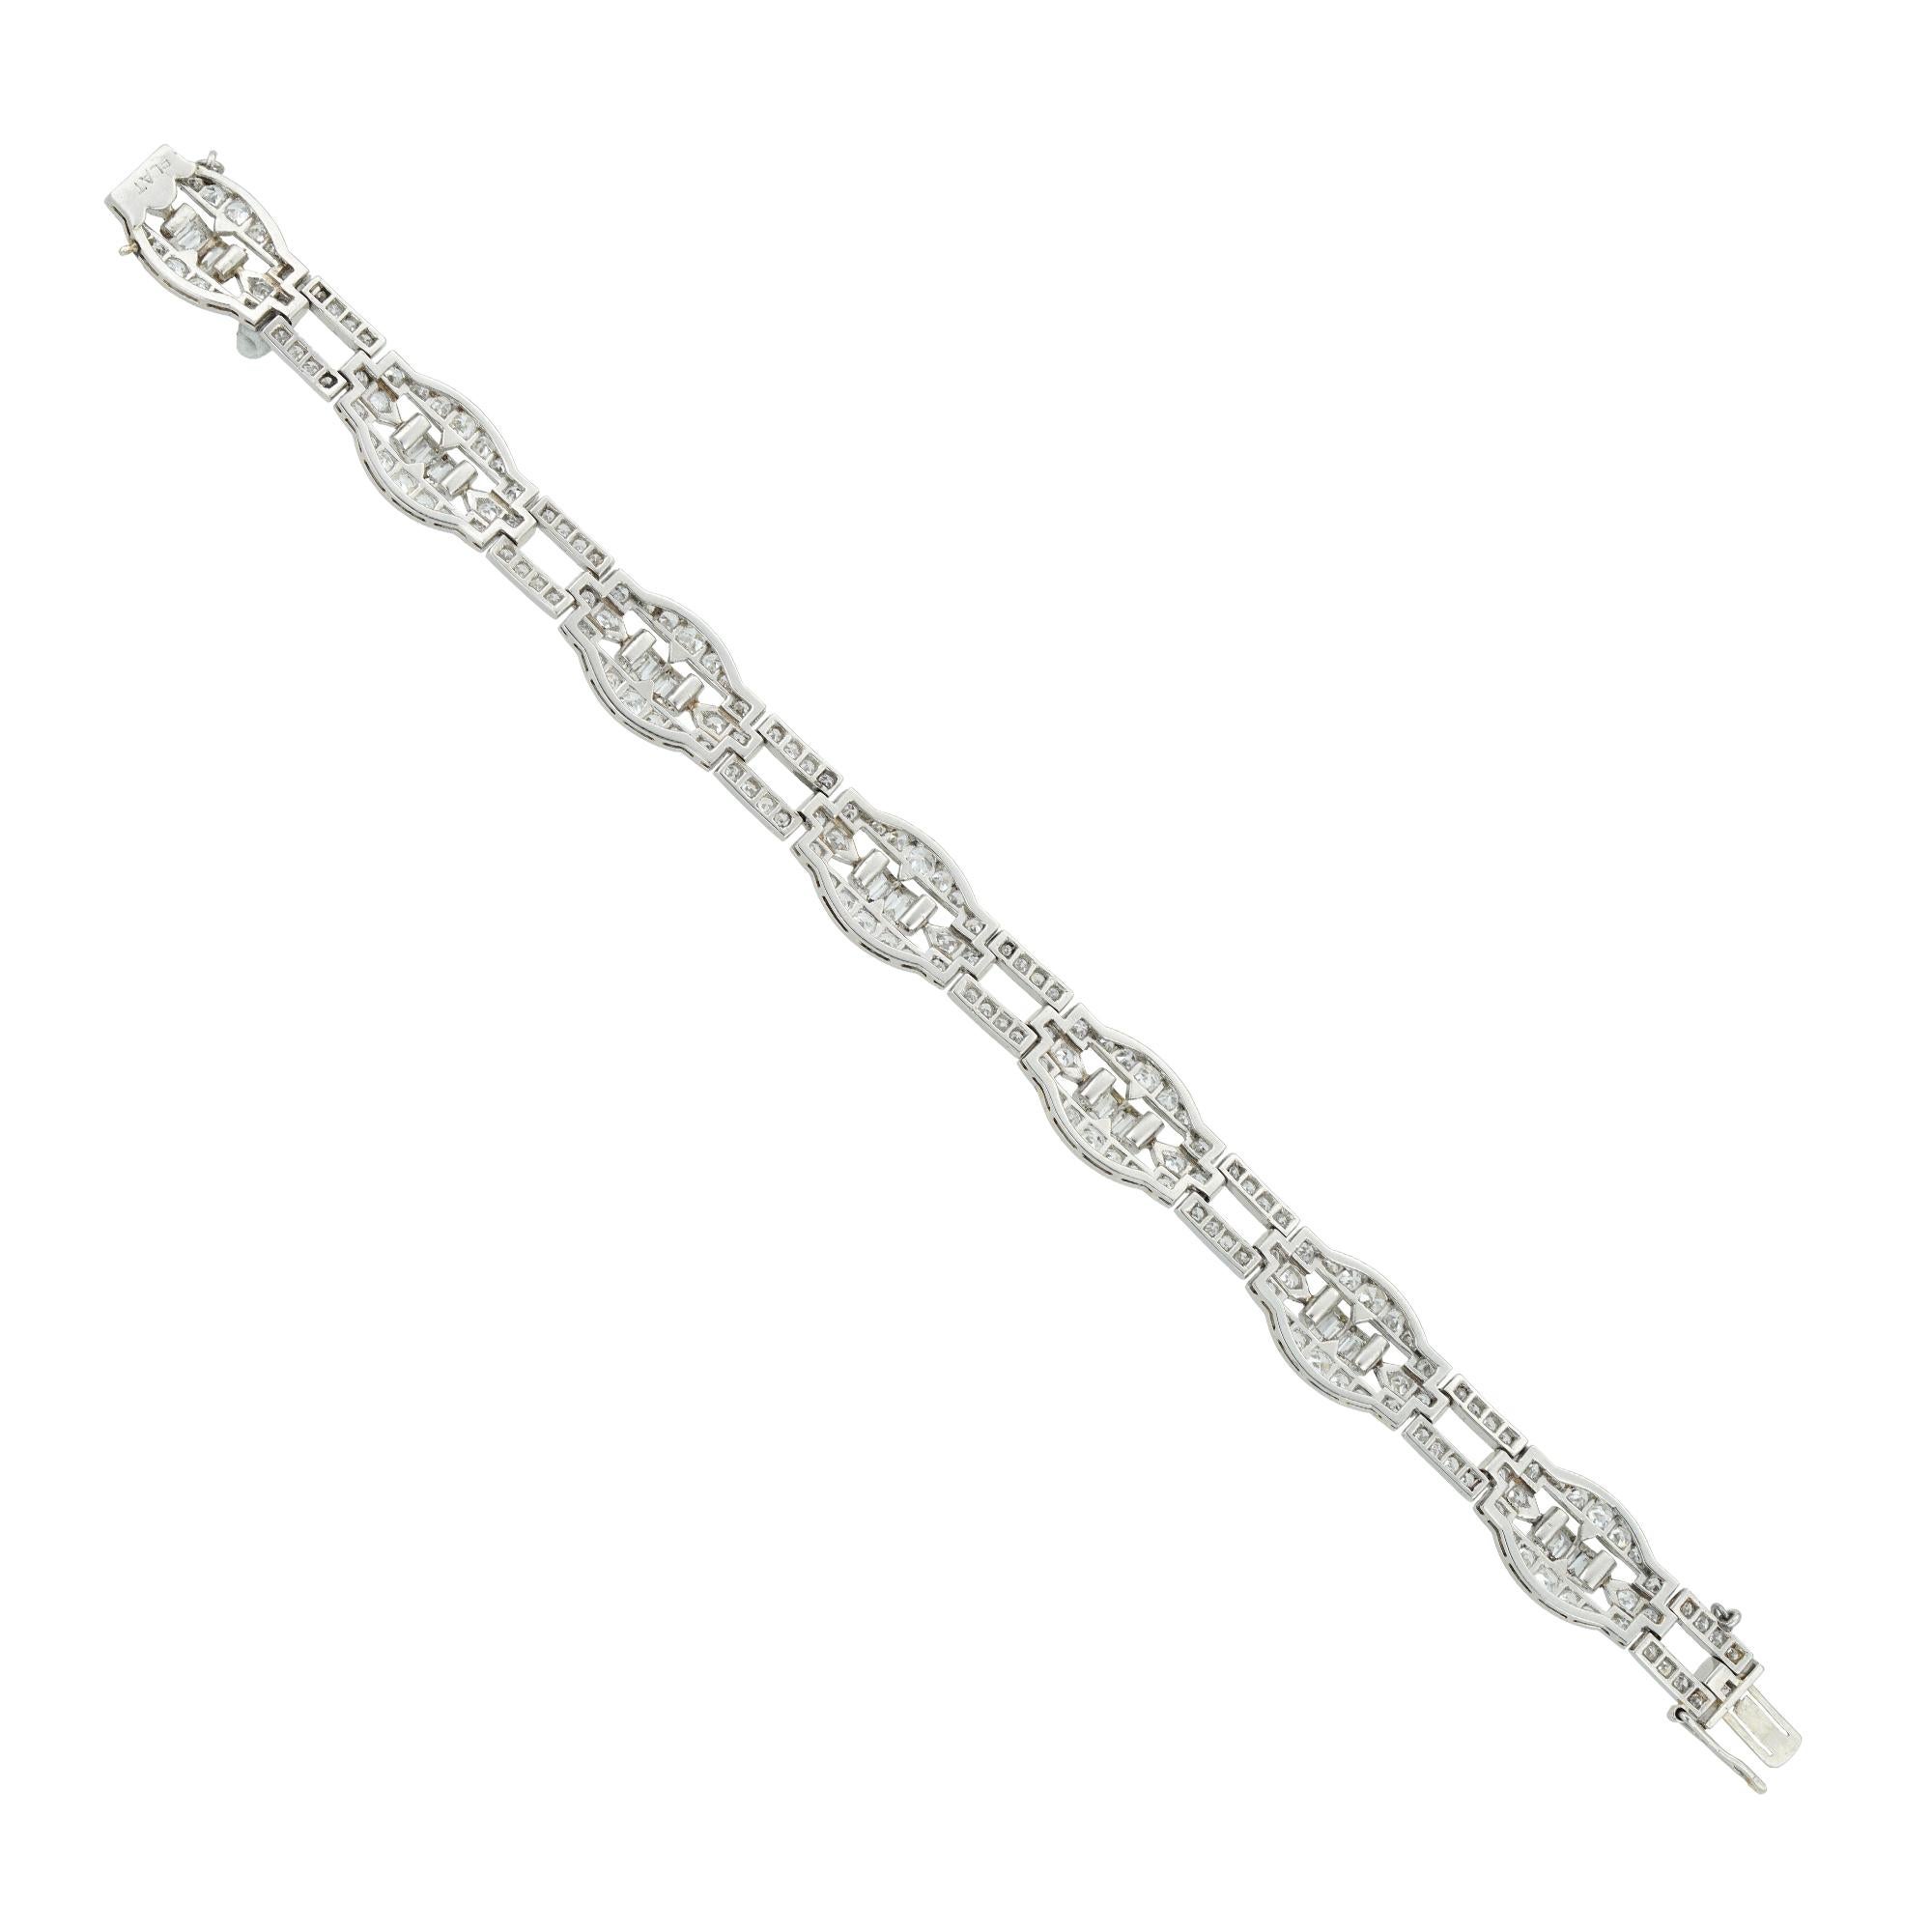 An Art Deco diamond-set bracelet, comprising of seven navette shape open panels with baguette-cut diamonds to the centre surrounded by eight-cut diamonds with an open rectangular eight-cut diamond-set links inbetween, estimated to weigh a total of